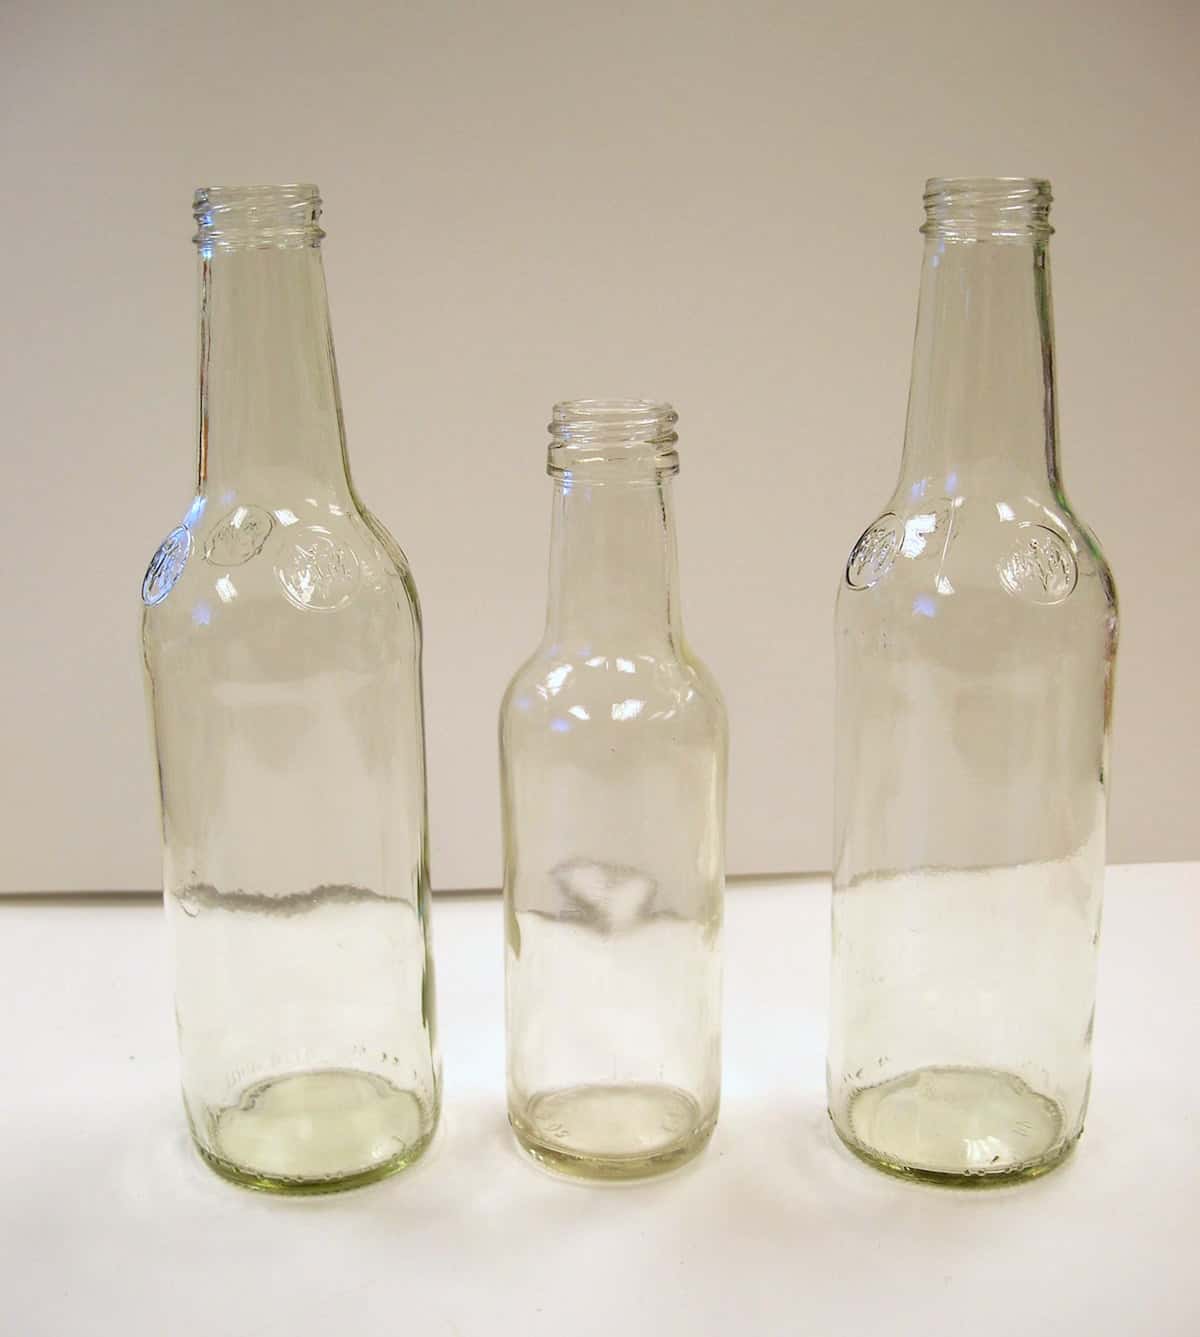 Three clear glass bottles